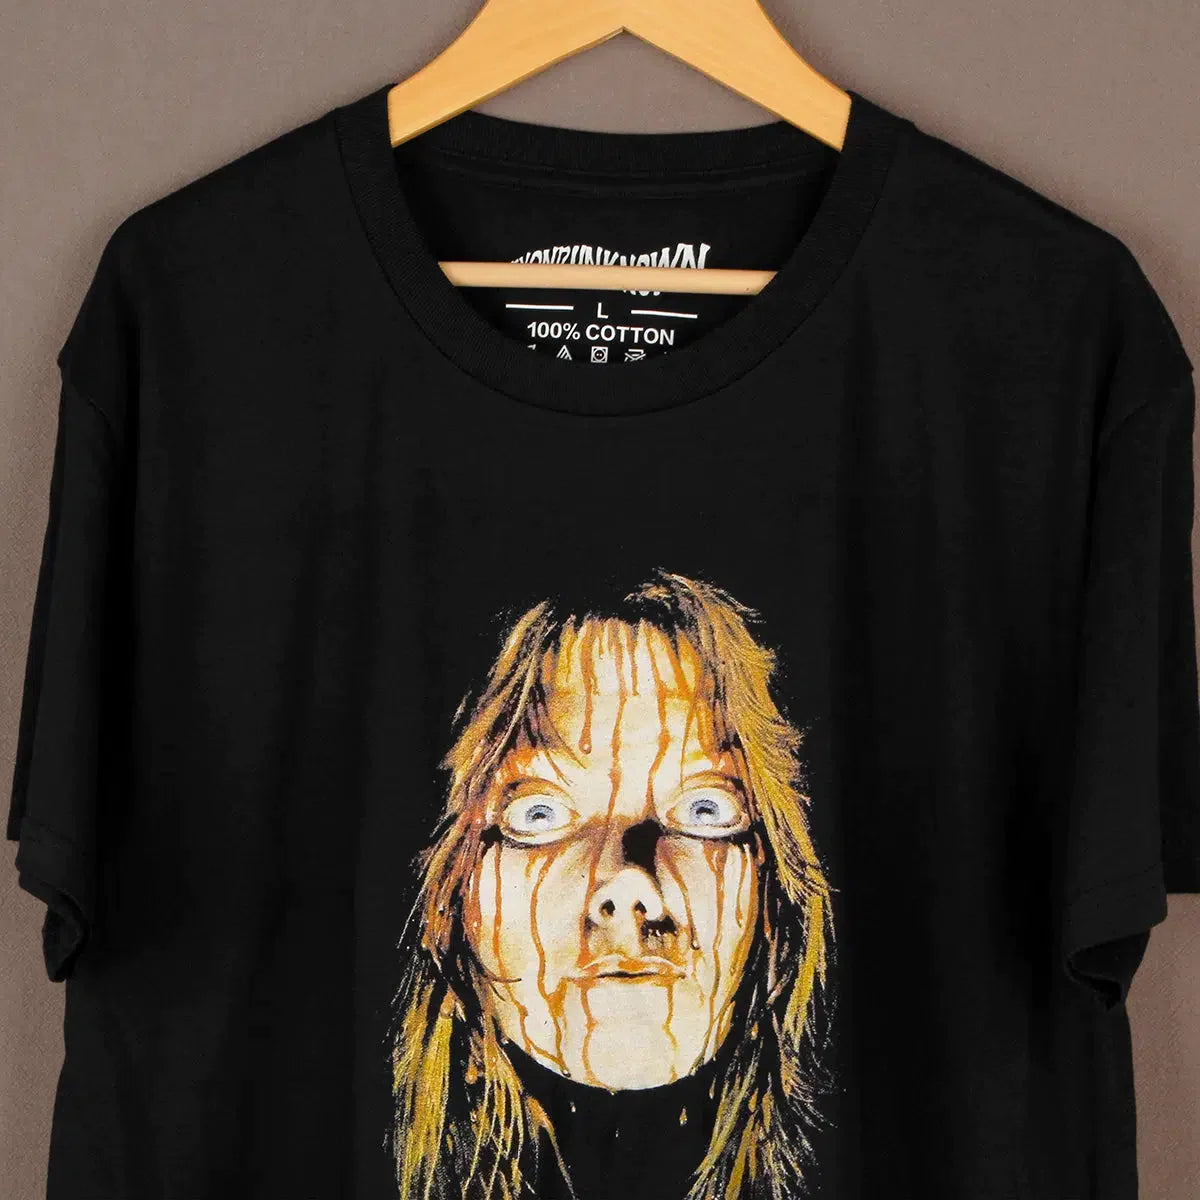 Vintage Witch Carrie Tee